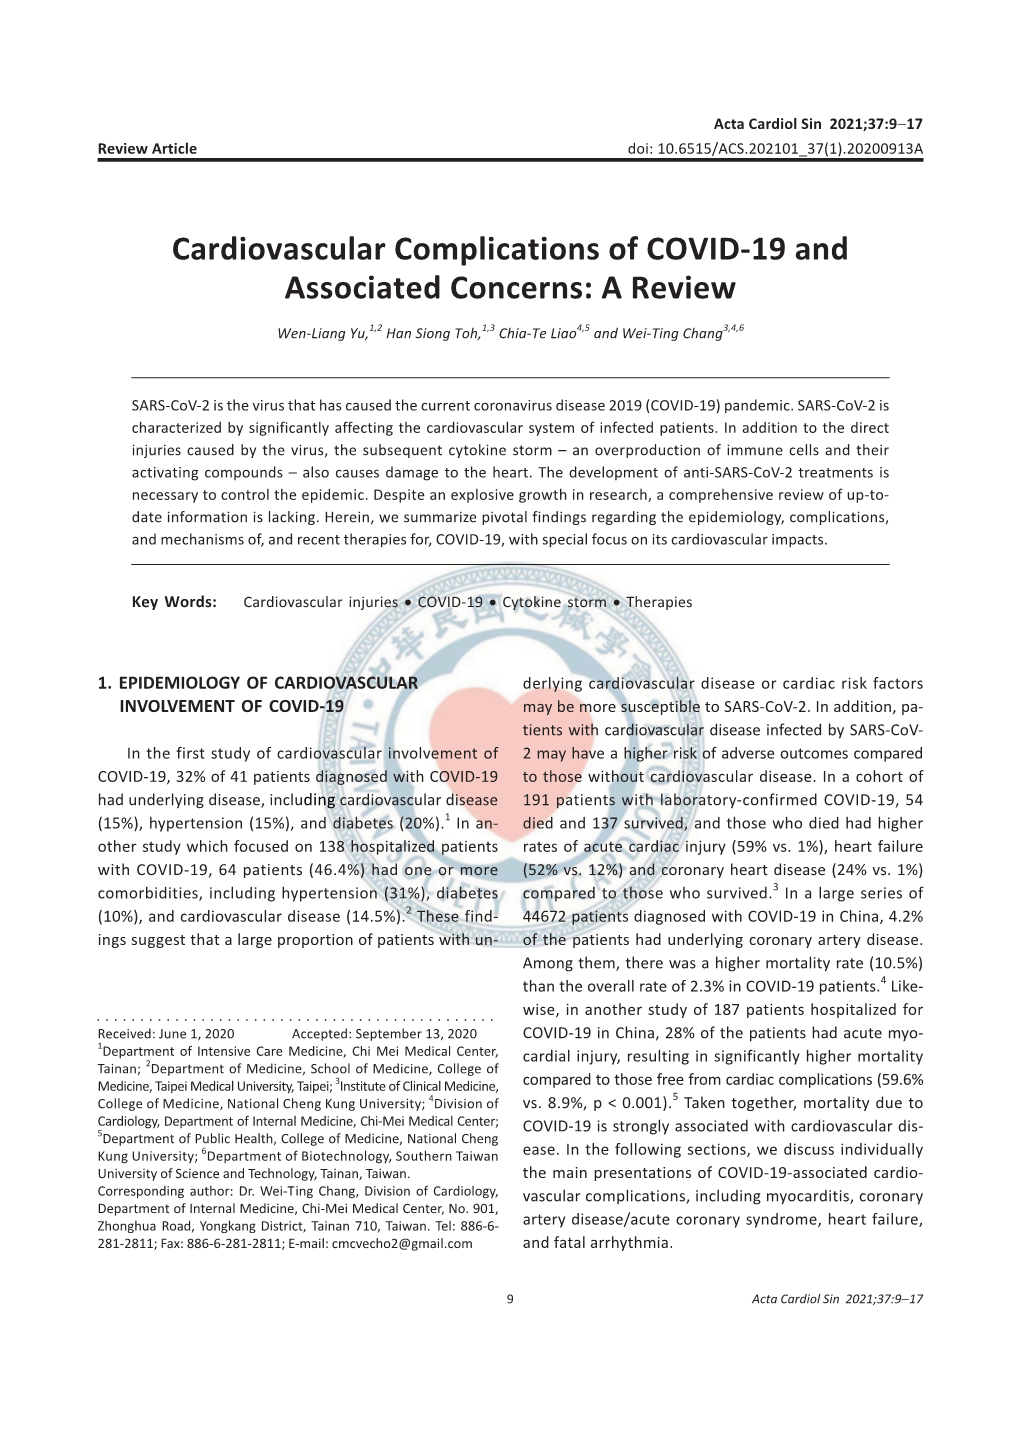 Cardiovascular Complications of COVID-19 and Associated Concerns: a Review